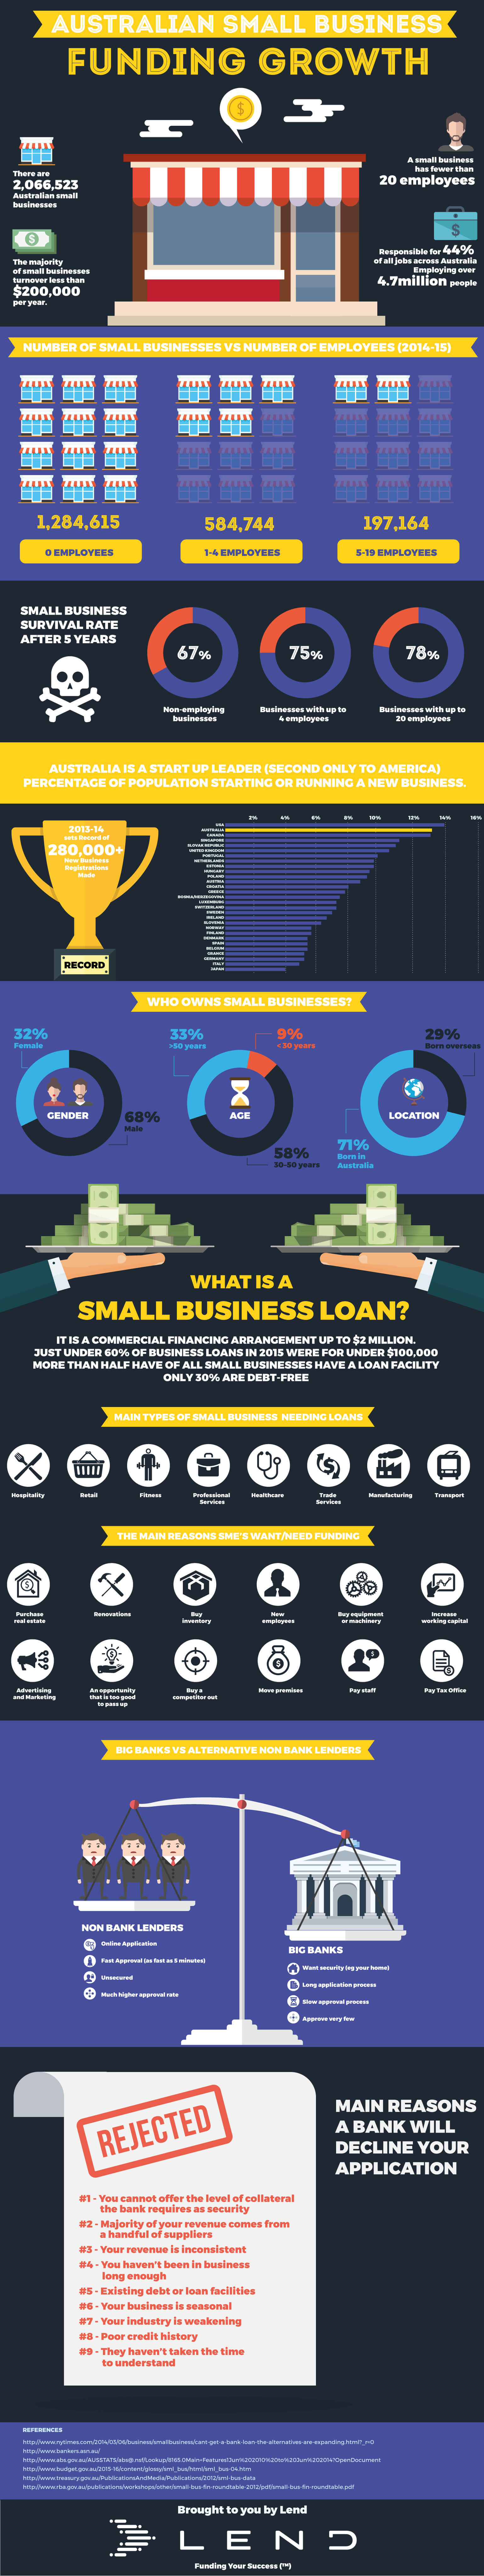 Australian Small Business & the Funding Challenges